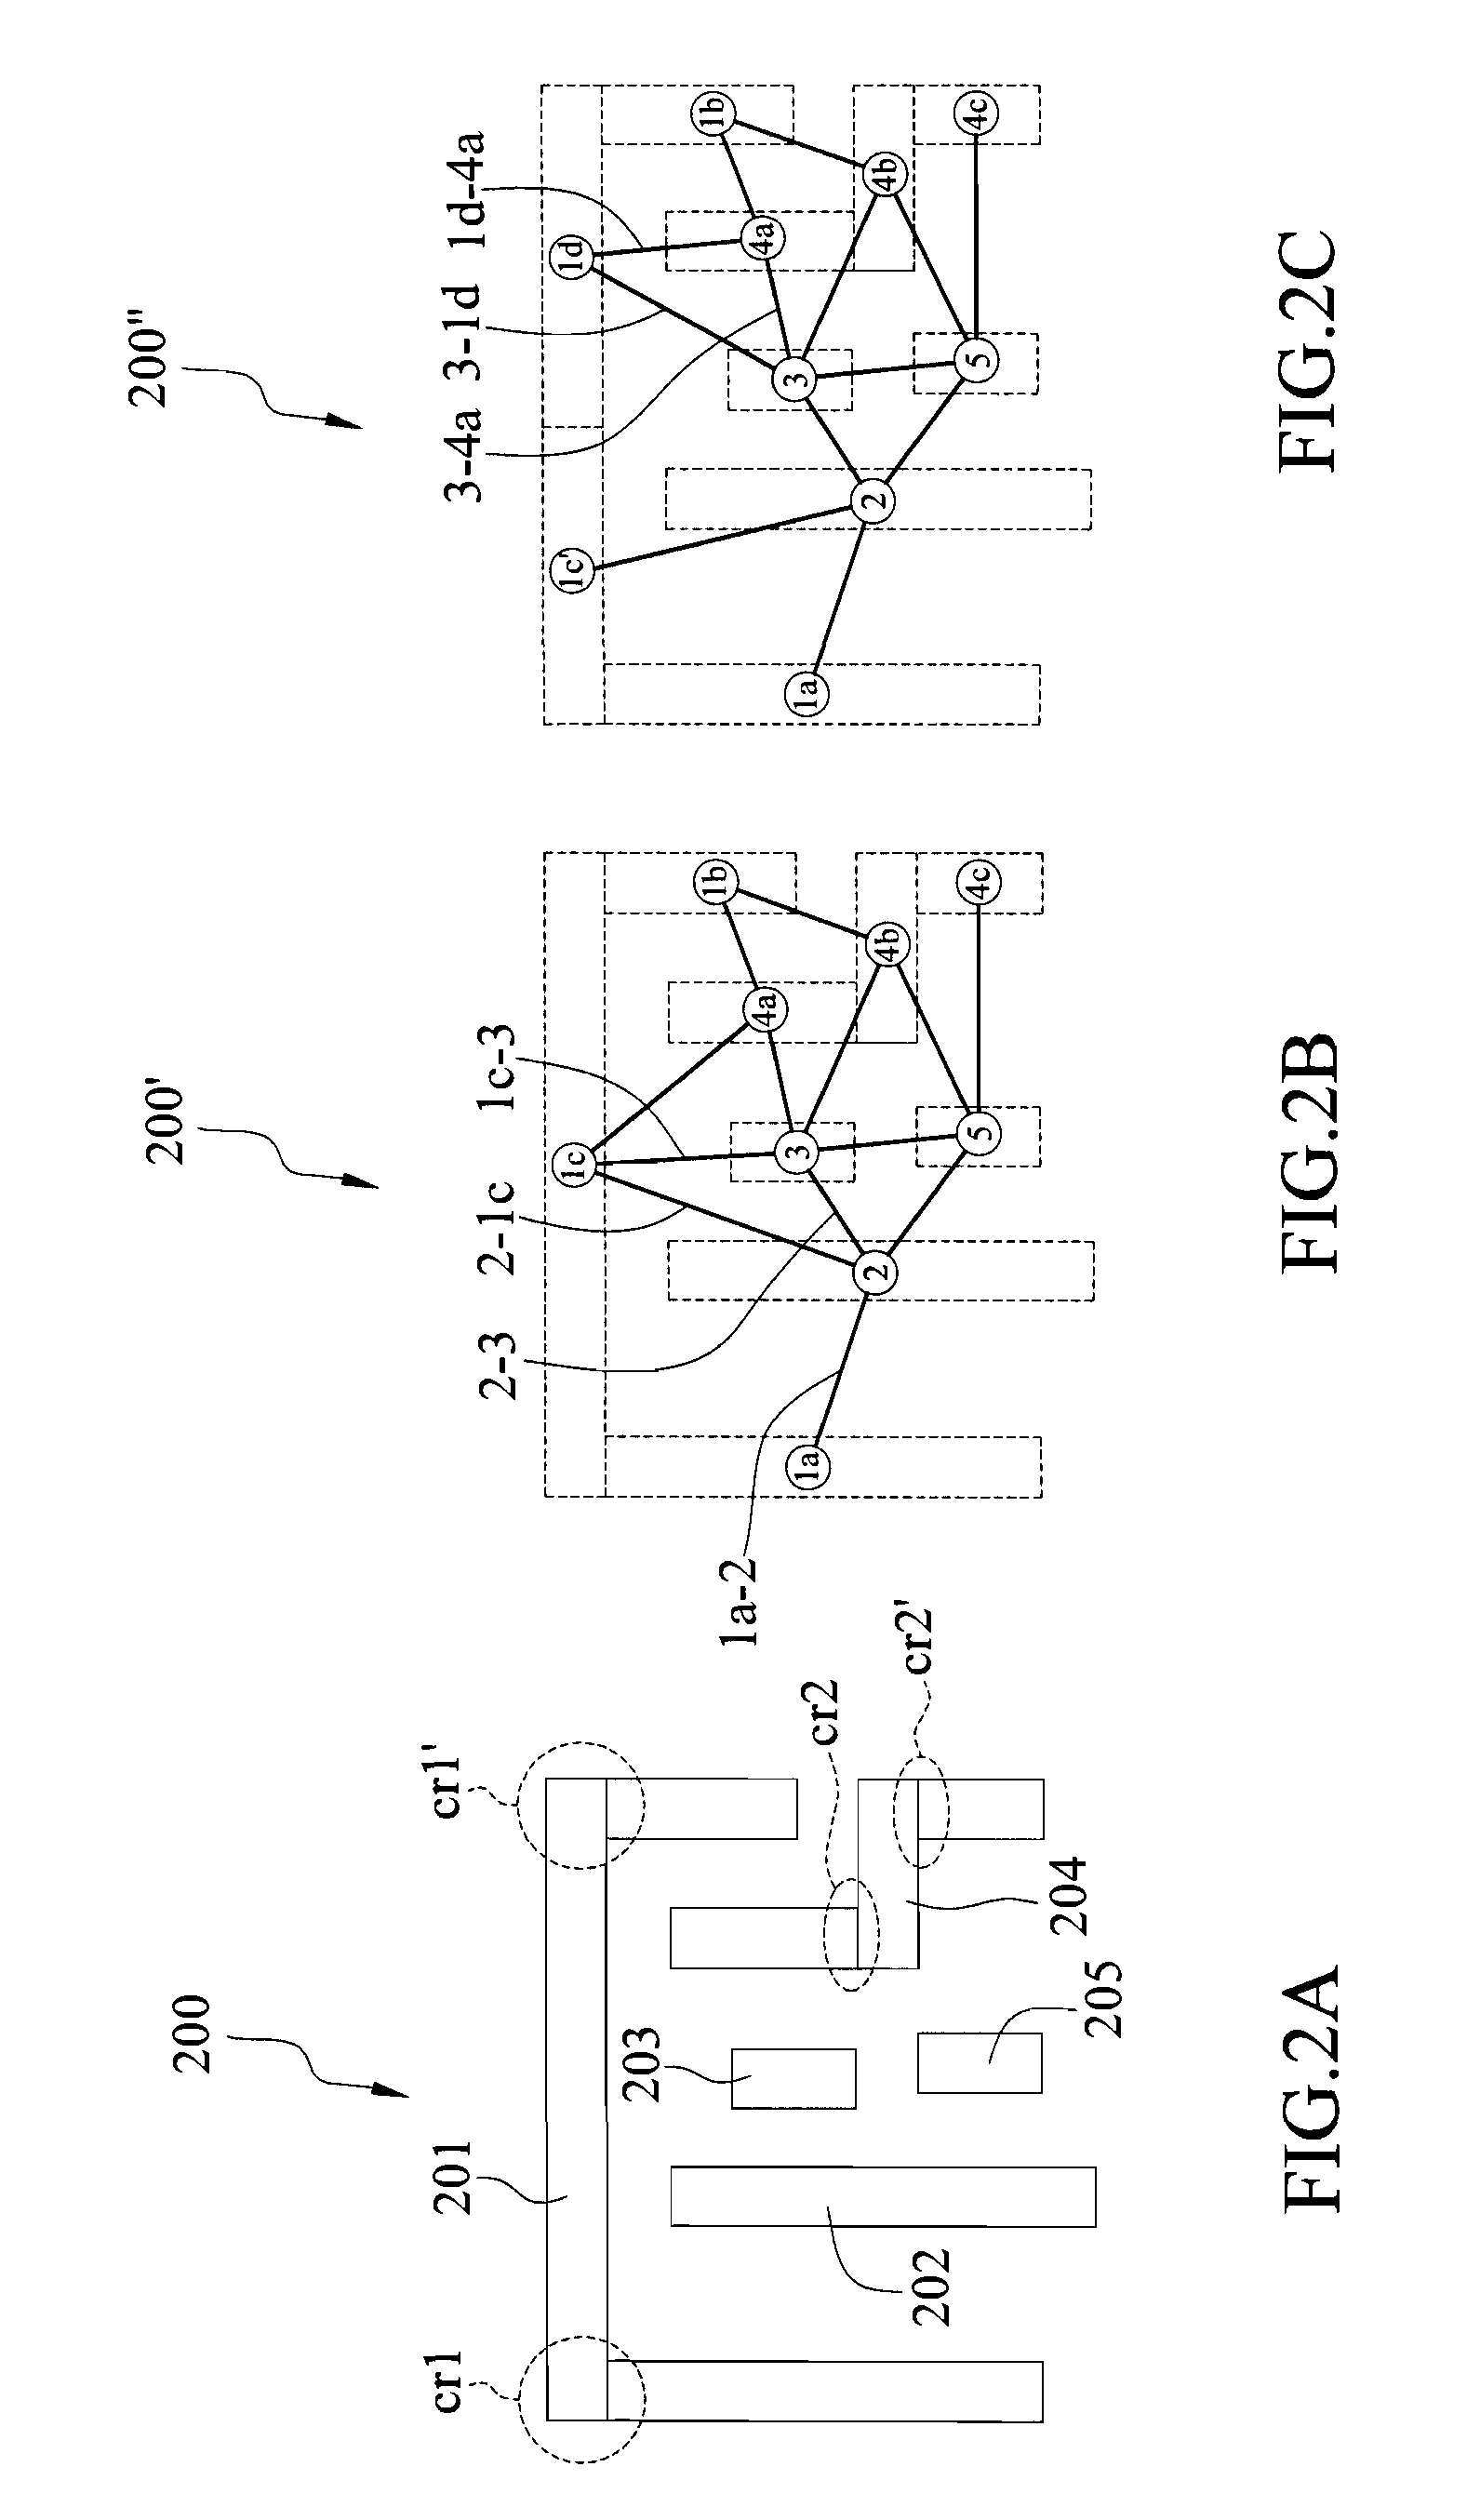 Method for concurrent migration and decomposition of integrated circuit layout